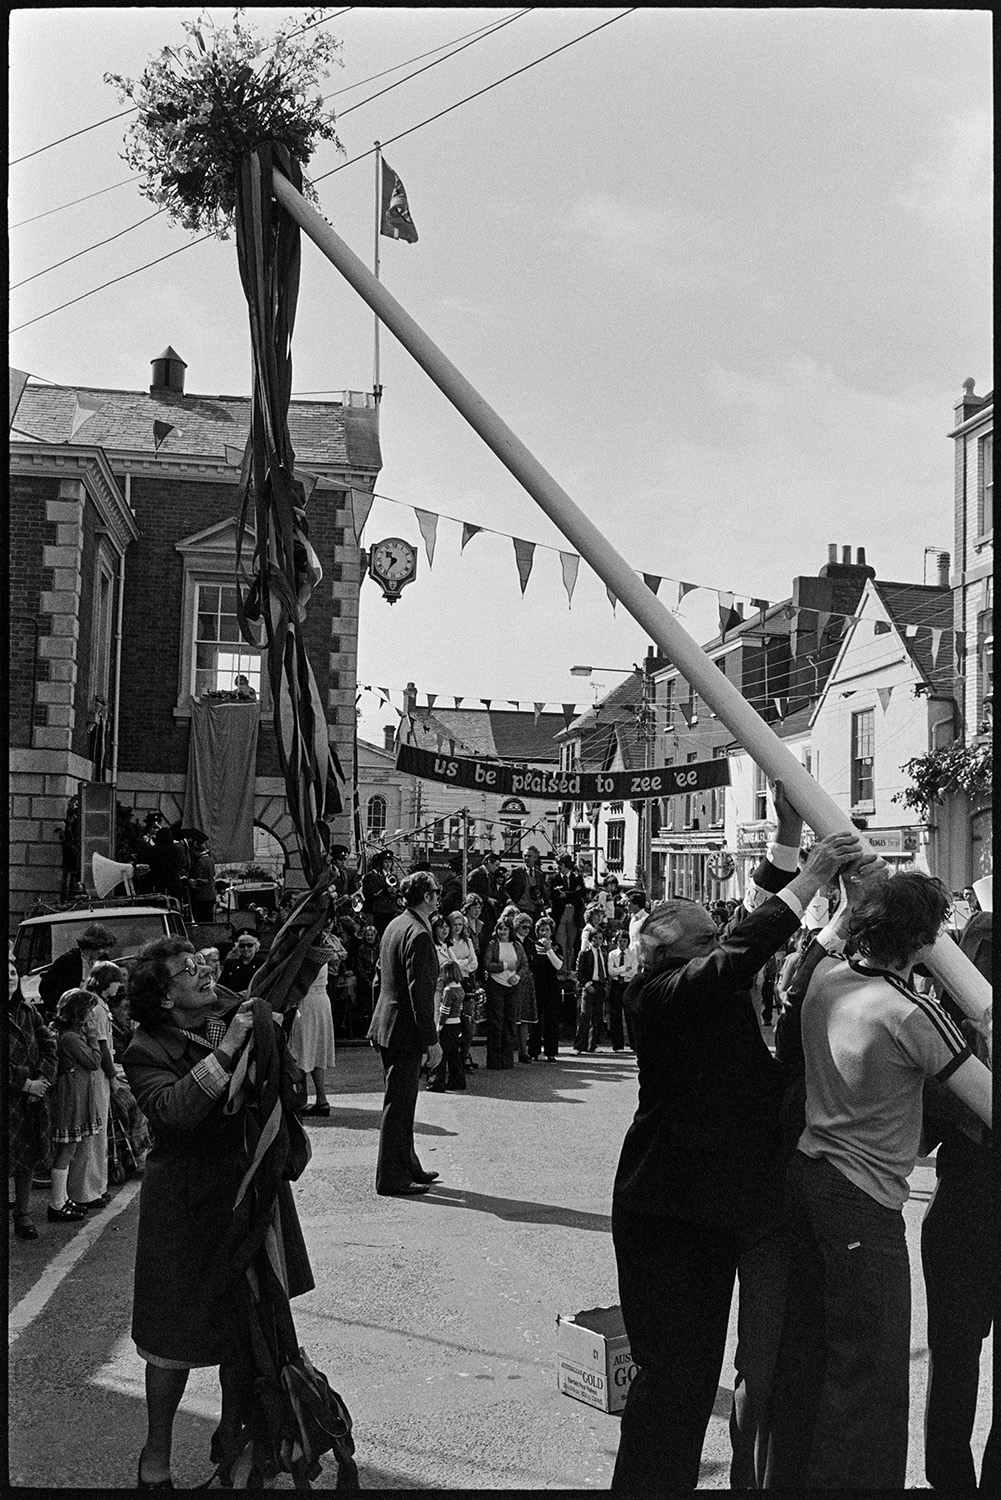 Hoisting the maypole in the town square. 
[Men hoisting the maypole in Torrington town square for Torrington Mayfair. A woman is holing the ribbons attached to the pole. Spectators are watching in the background and the street is decorated with bunting and banners.]